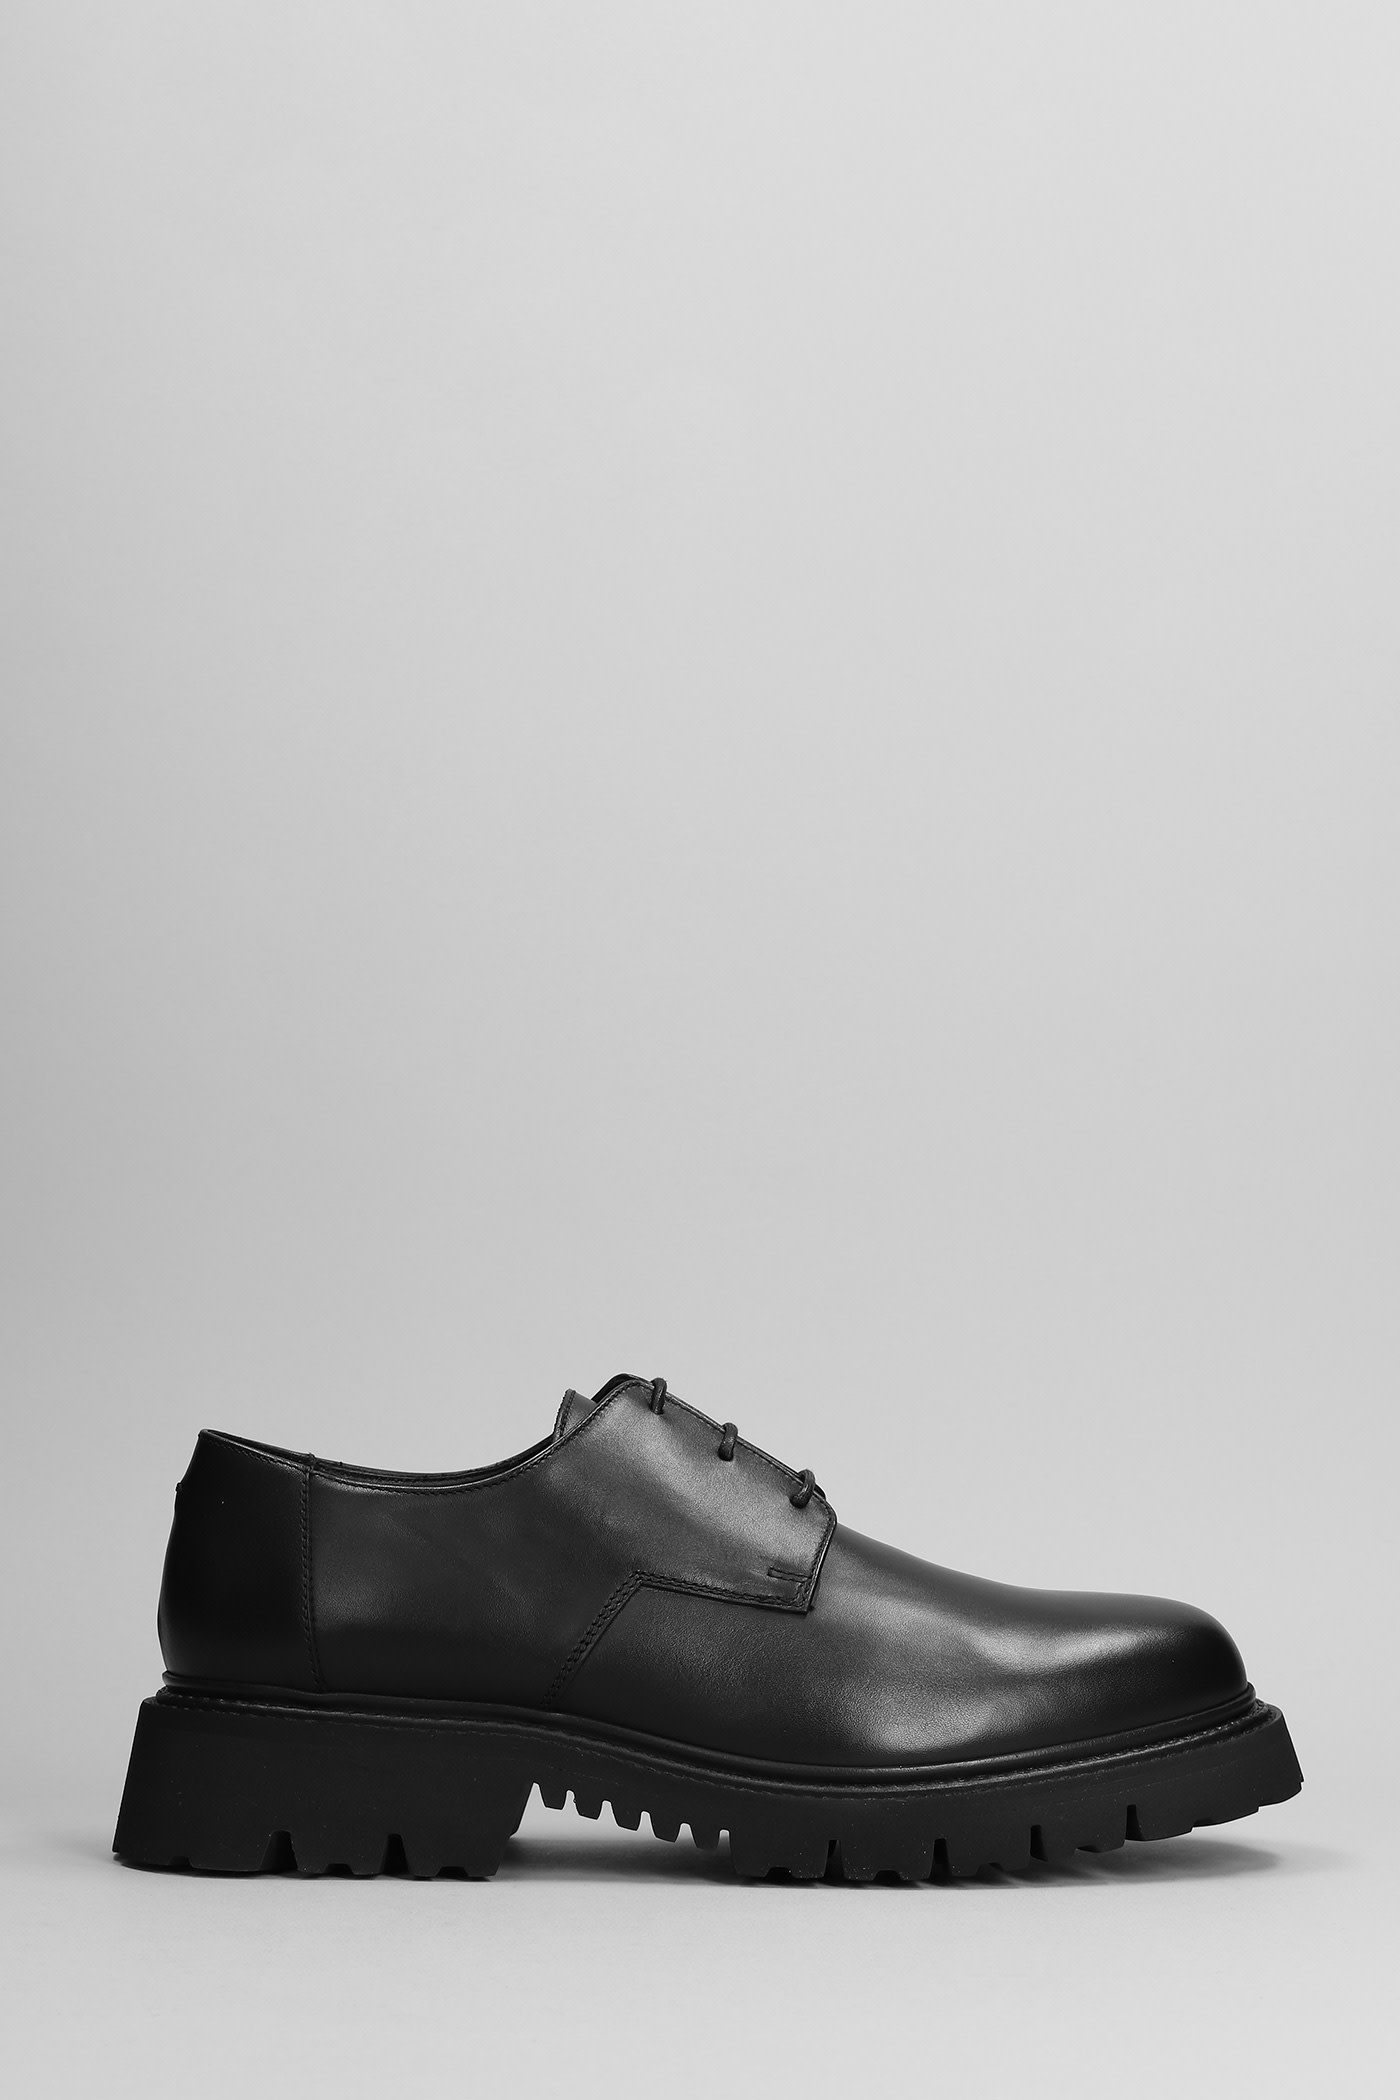 NEIL BARRETT LACE UP SHOES IN BLACK LEATHER